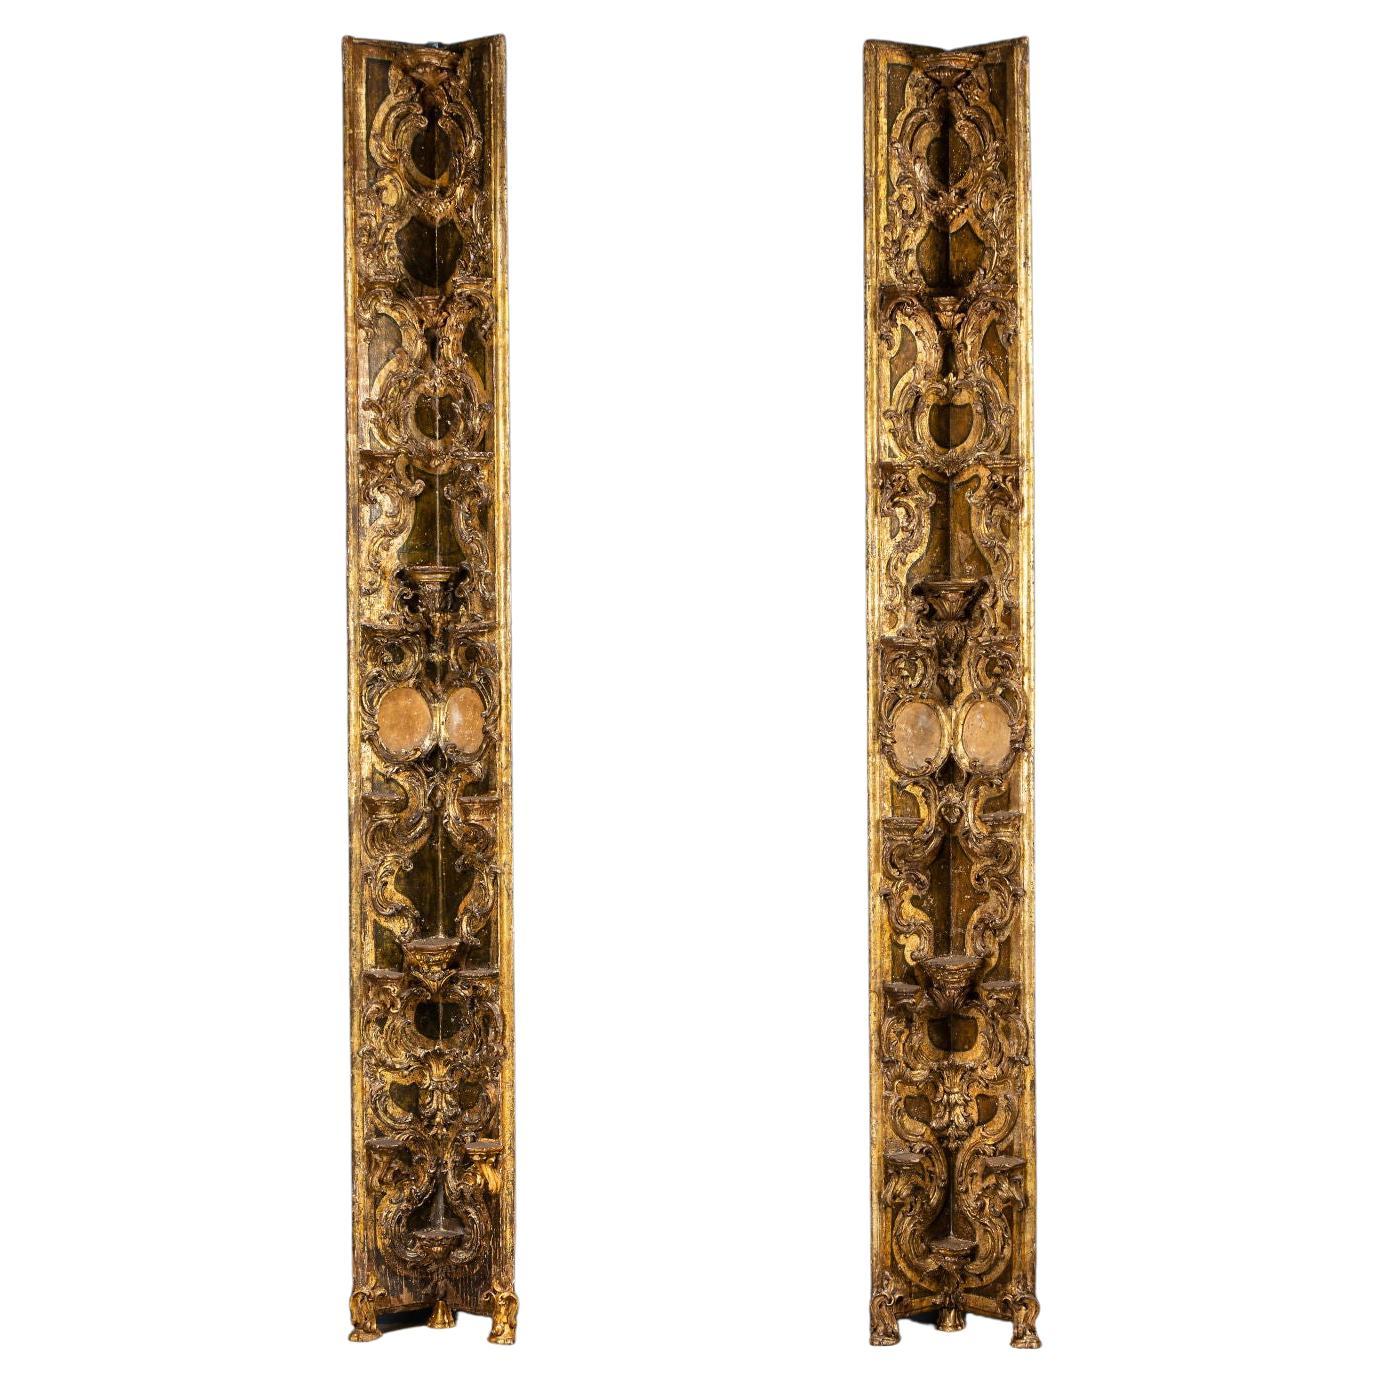 Couple of Corner Pilasters with Ceramic Carved Wood, Italy, 18th Century For Sale